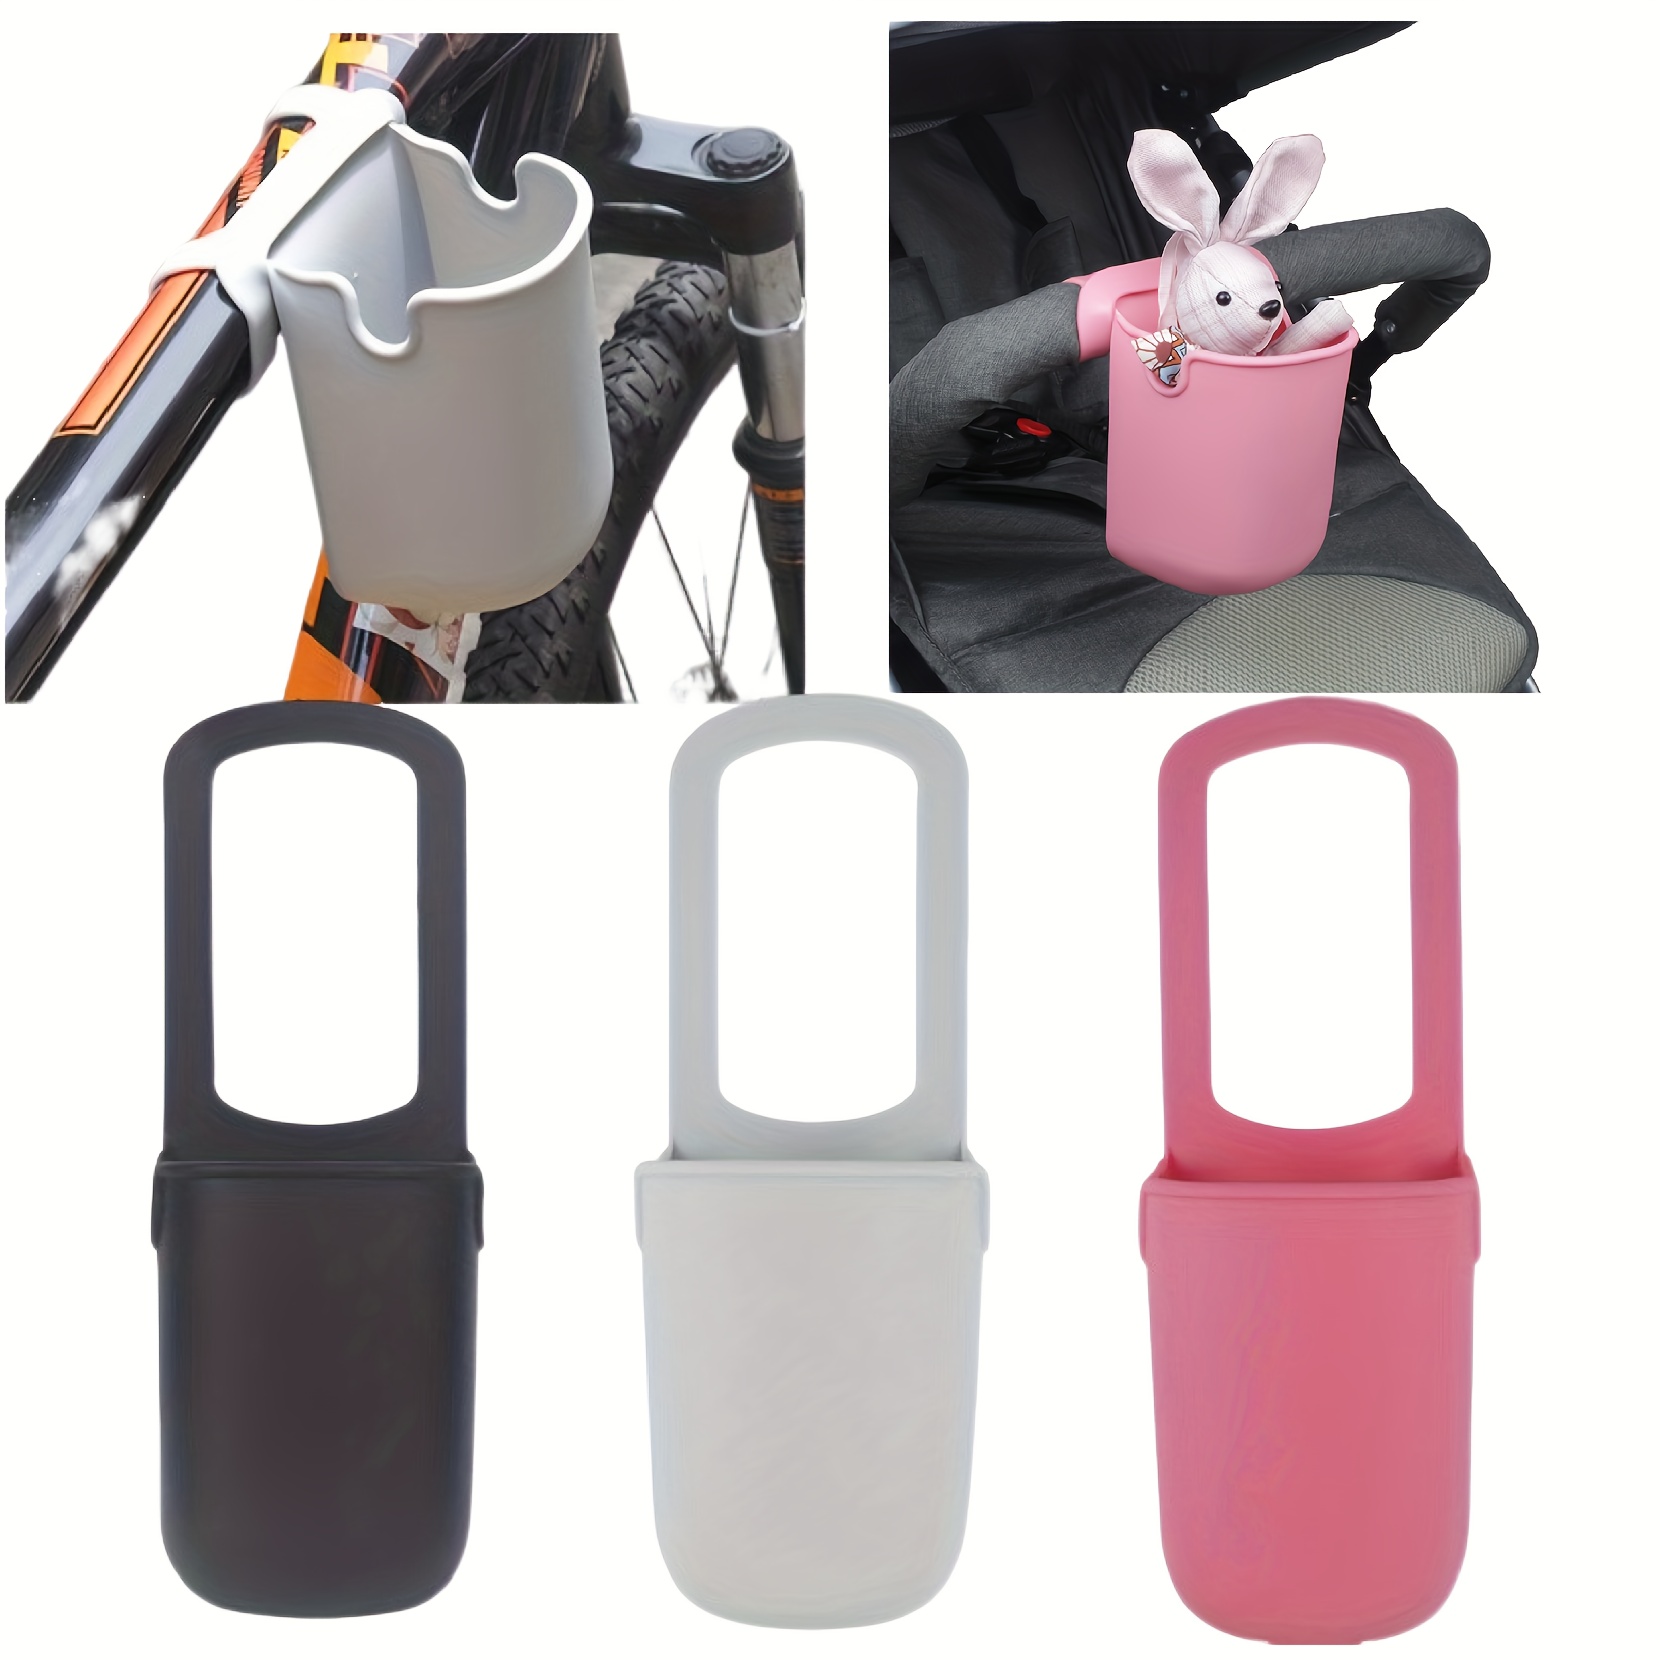 

1pc Bike Bottle Holder, Stroller Cup Holder, Silicone Bike Water Bottle Holder, Outdoor Portable Cup Holder, For Wheelchair, Stroller, Scooter, Bicycles